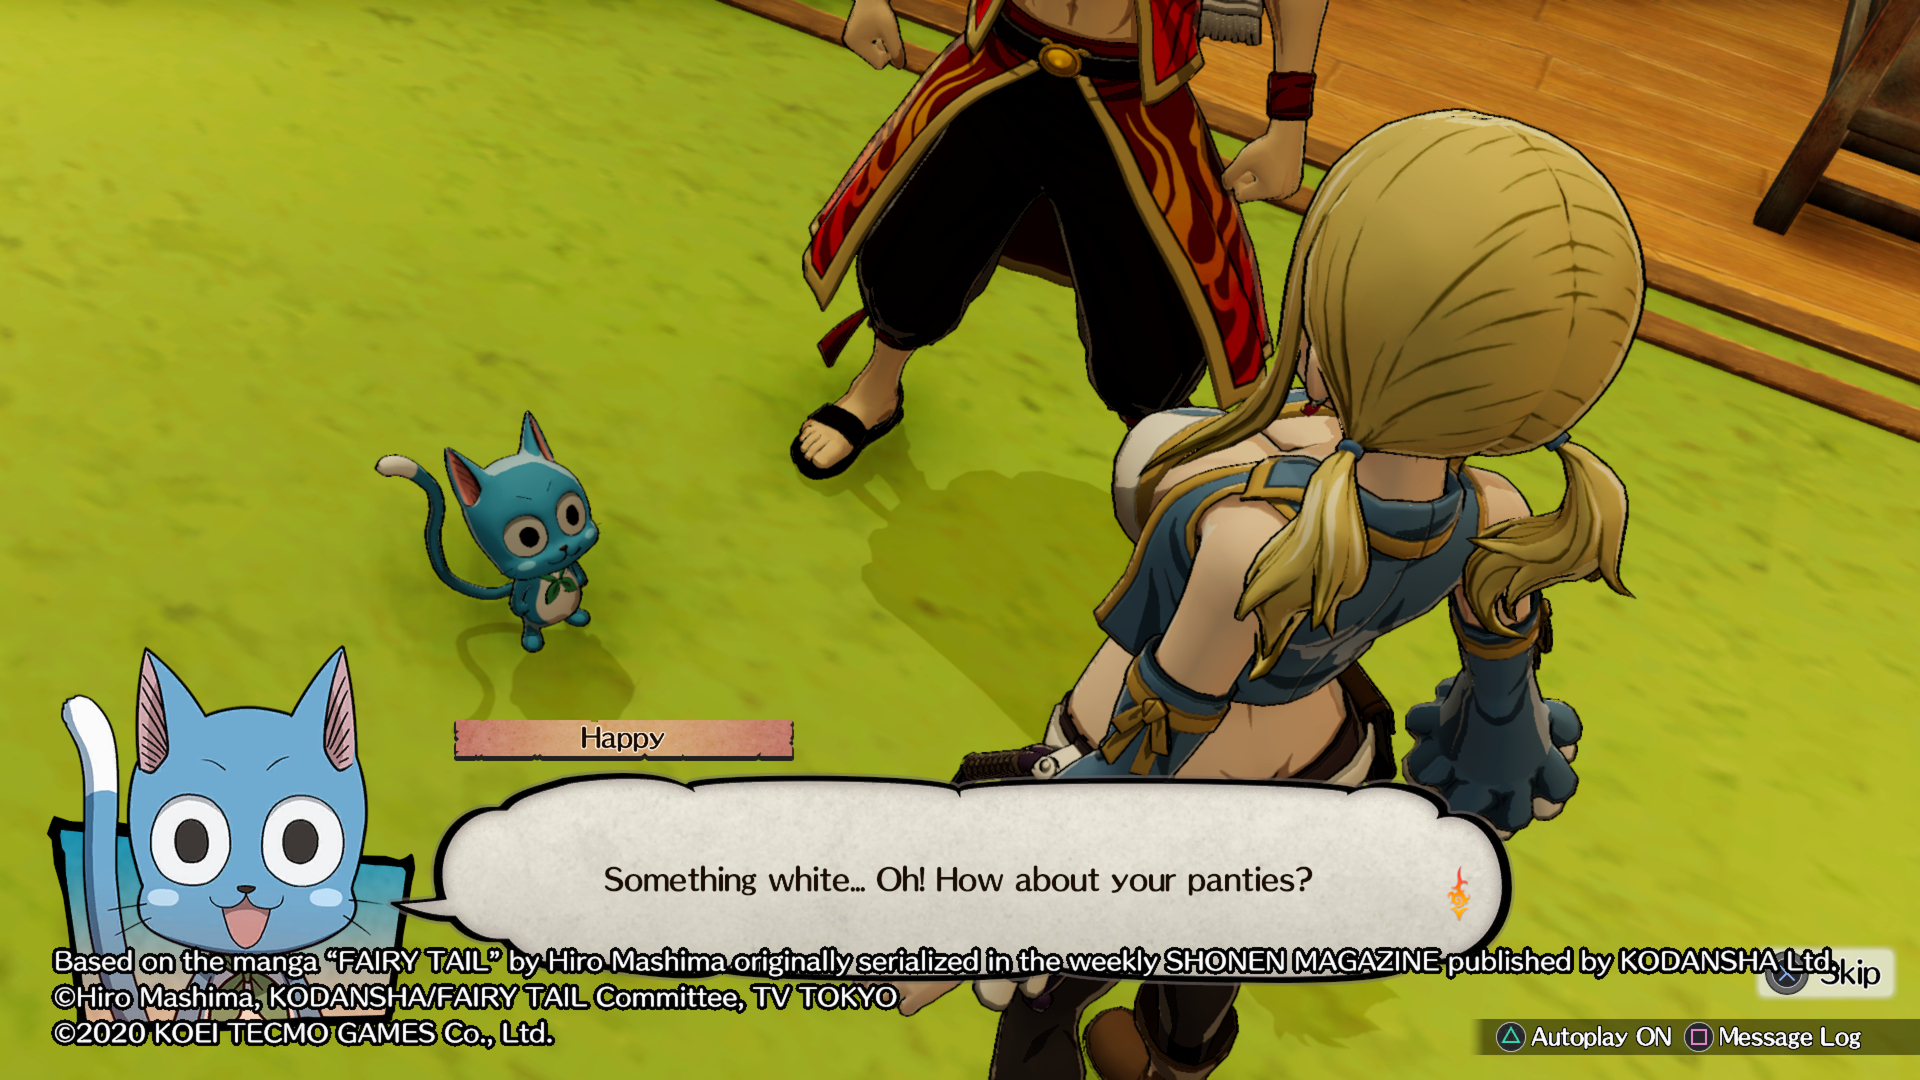 UPCOMING ACTION RPG GAMES 2021, Fairy Tail: Fighting [CN], CBT GAMEPLAY, action role-playing game, language